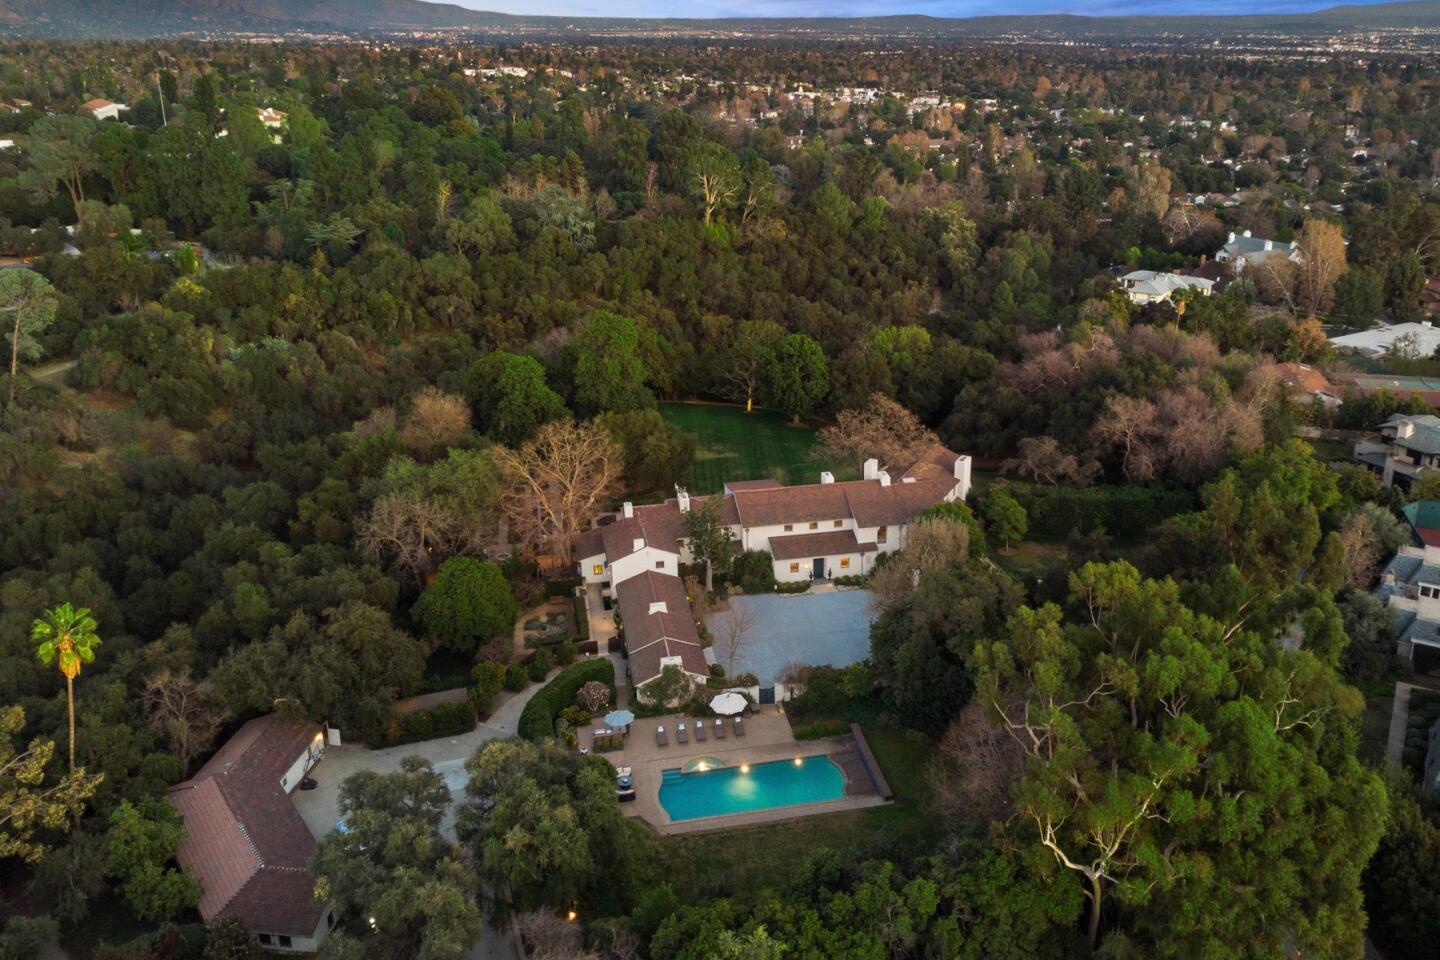 Aerial view of the estate with pool and surrounded by trees.